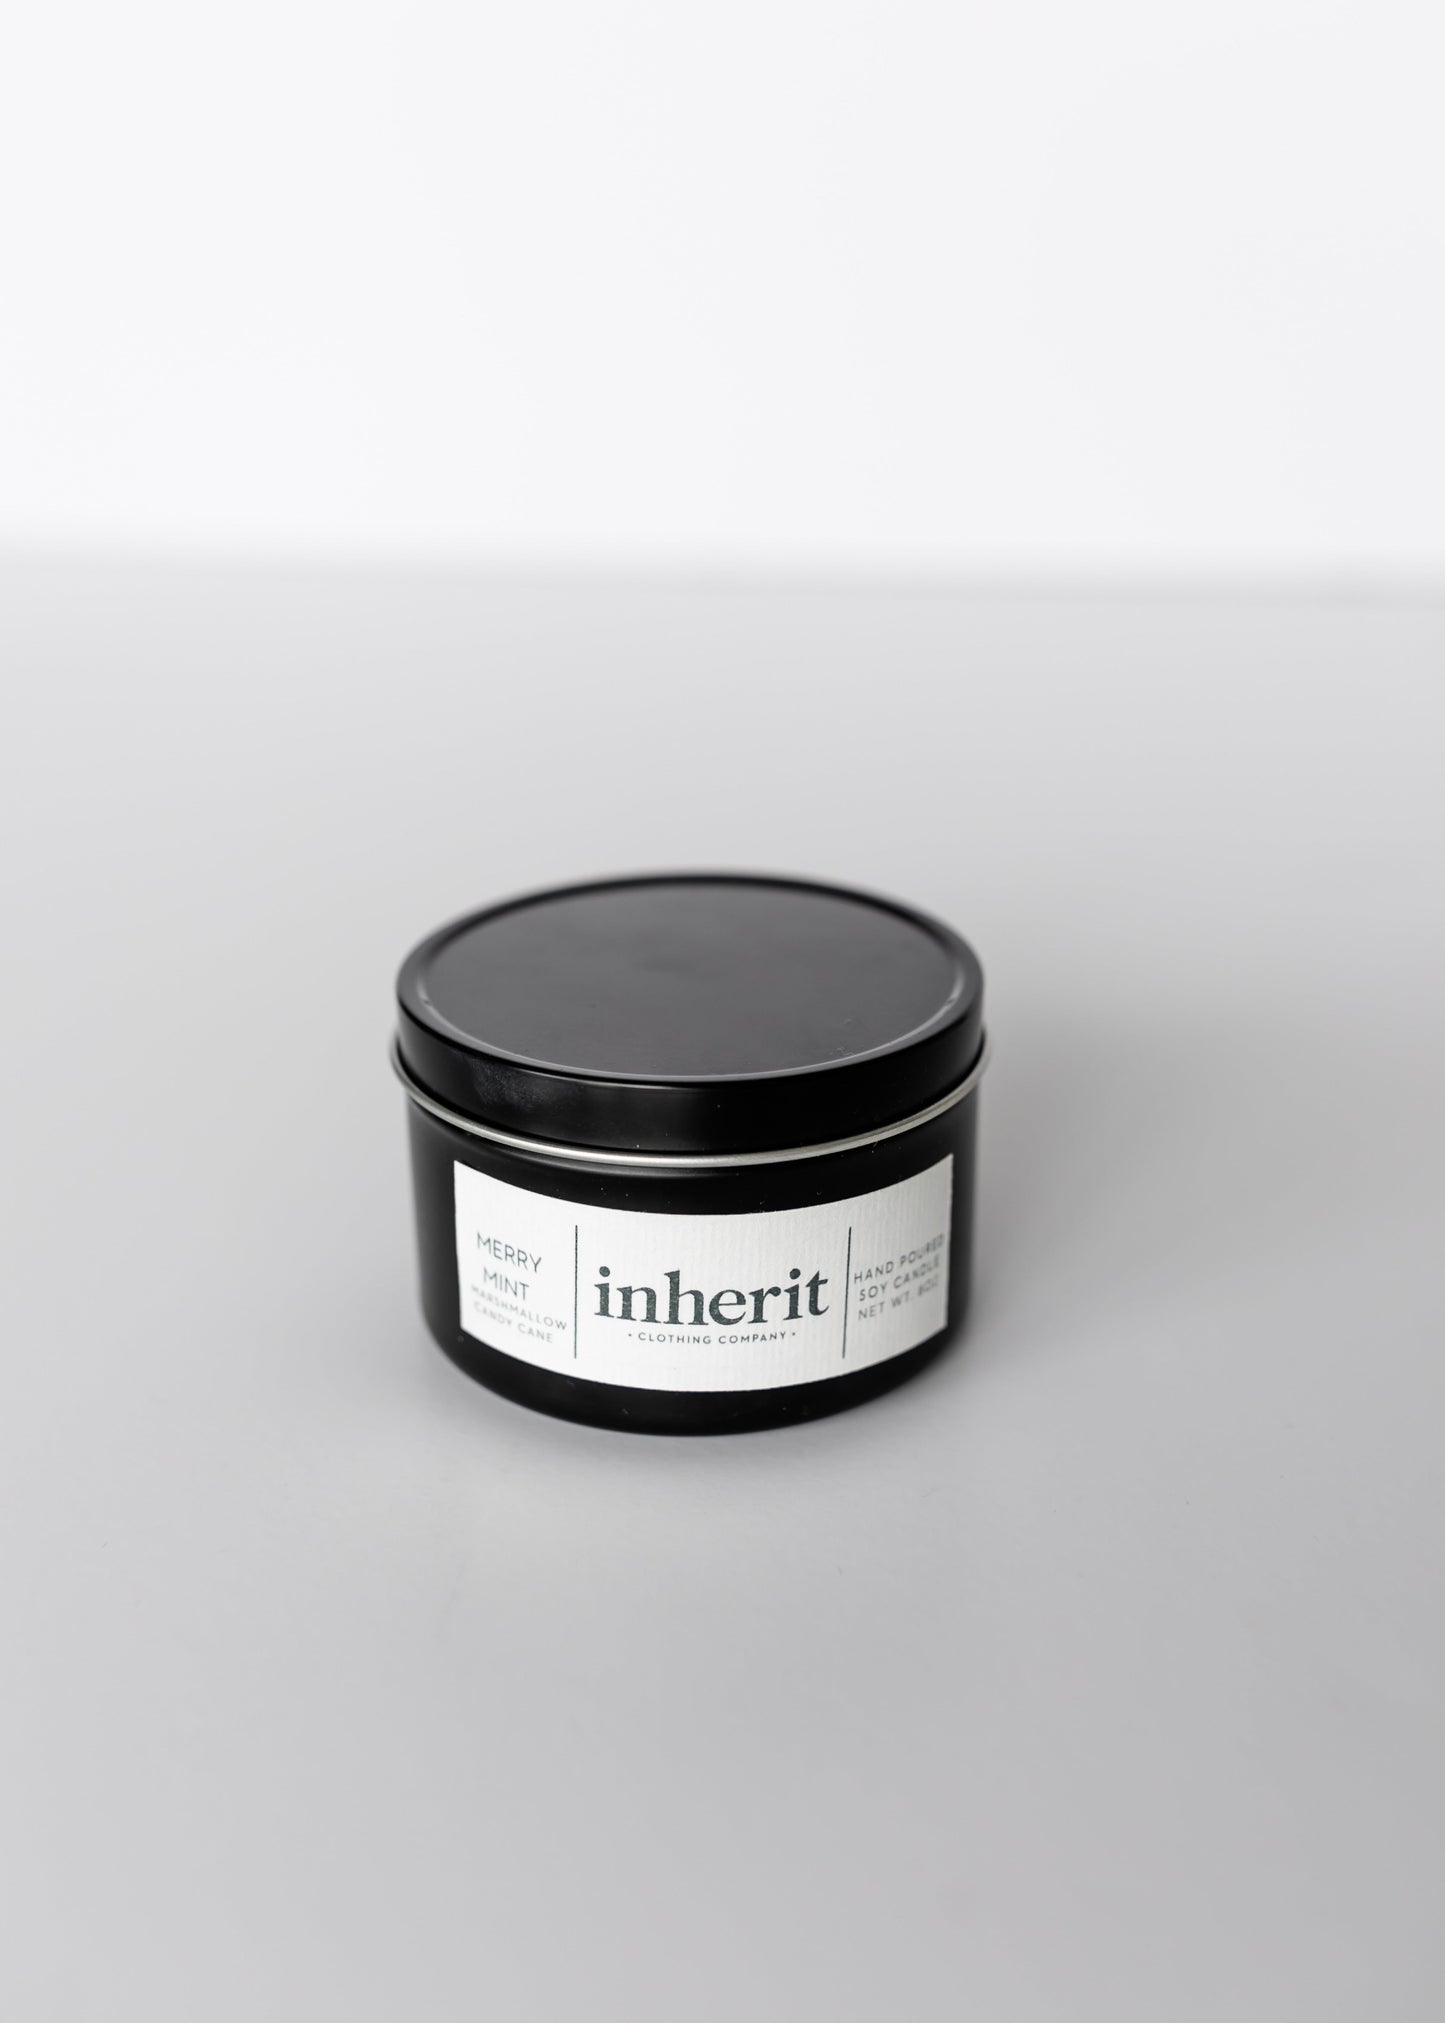 Inherit Winter Scented Soy Candle 8oz. - FINAL SALE Gifts Merry Mint